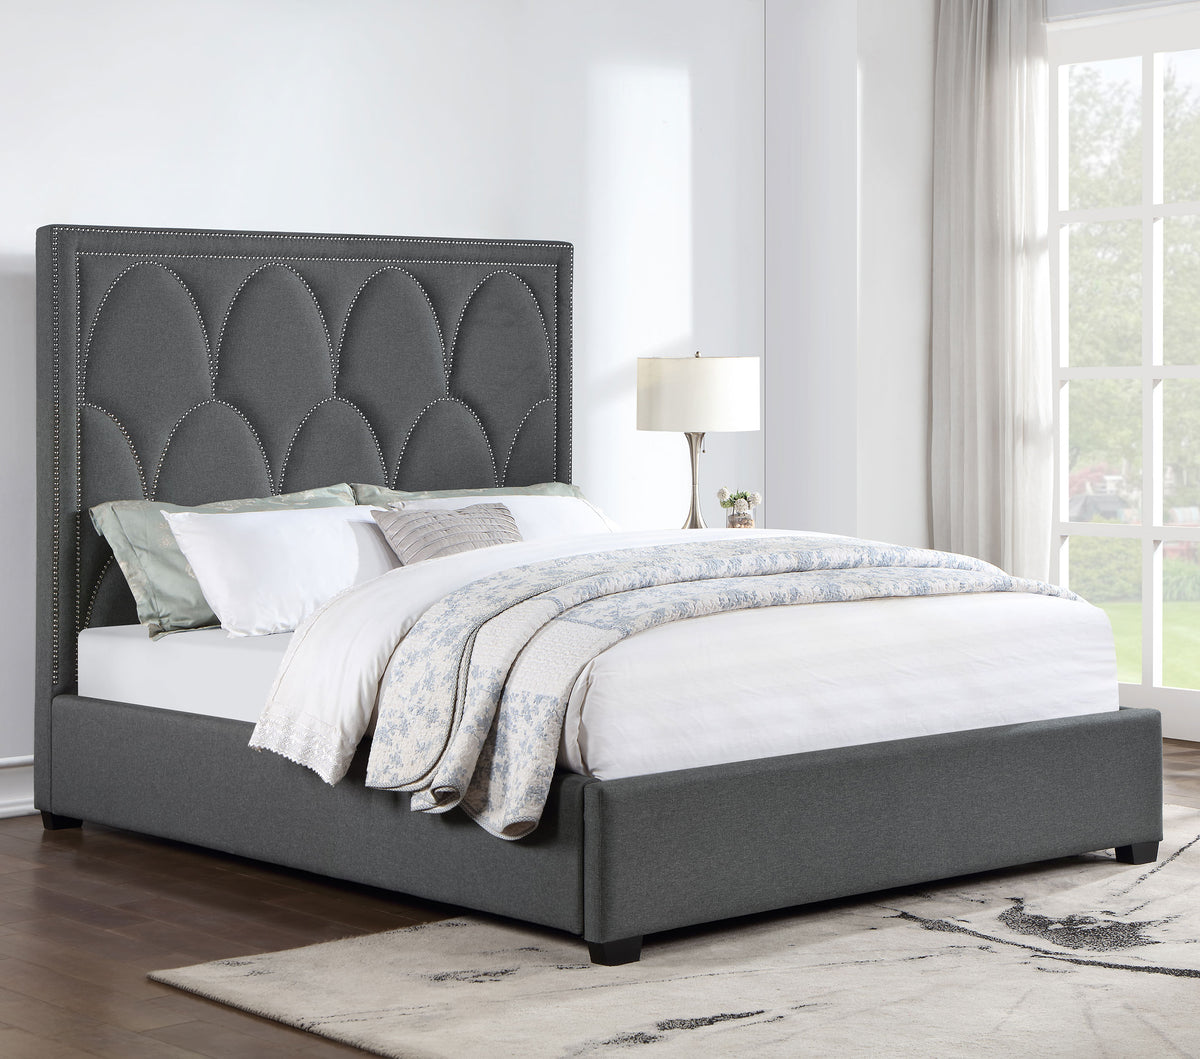 Bowfield Upholstered Bed with Nailhead Trim Charcoal Bowfield Upholstered Bed with Nailhead Trim Charcoal Half Price Furniture